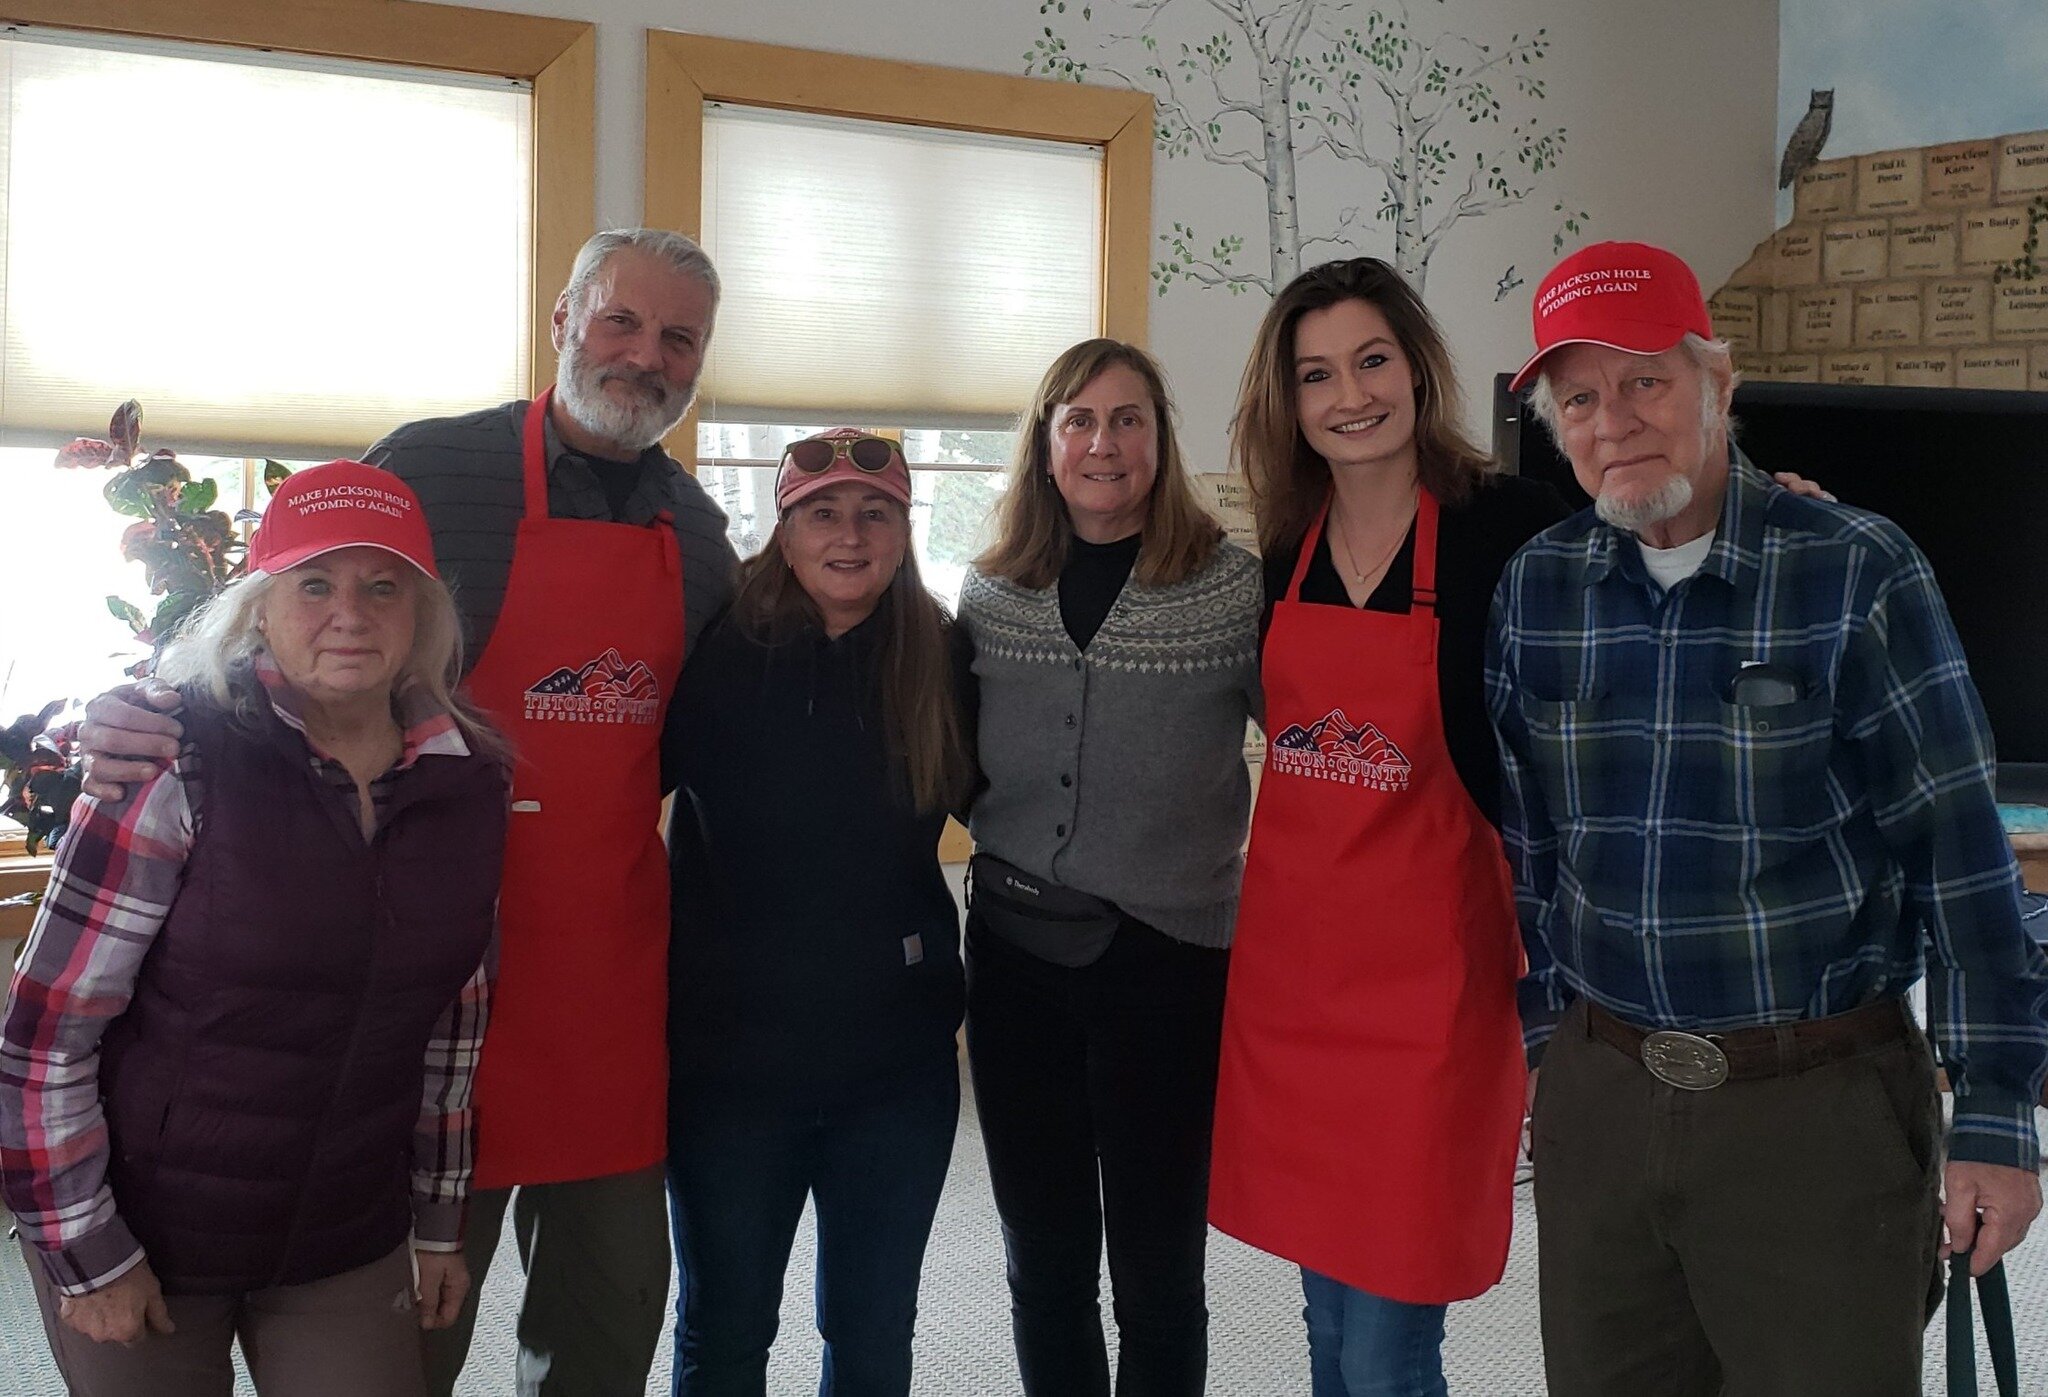 Thank you to our amazing Senior Center volunteers - what a fun Friday Feast!

The Teton County Republican Party helps serve lunch the first Friday of every month. Feel free to join in next month!

🥰🤩👏👍

#tetoncountyrepublicanparty 
#jacksonwyomin